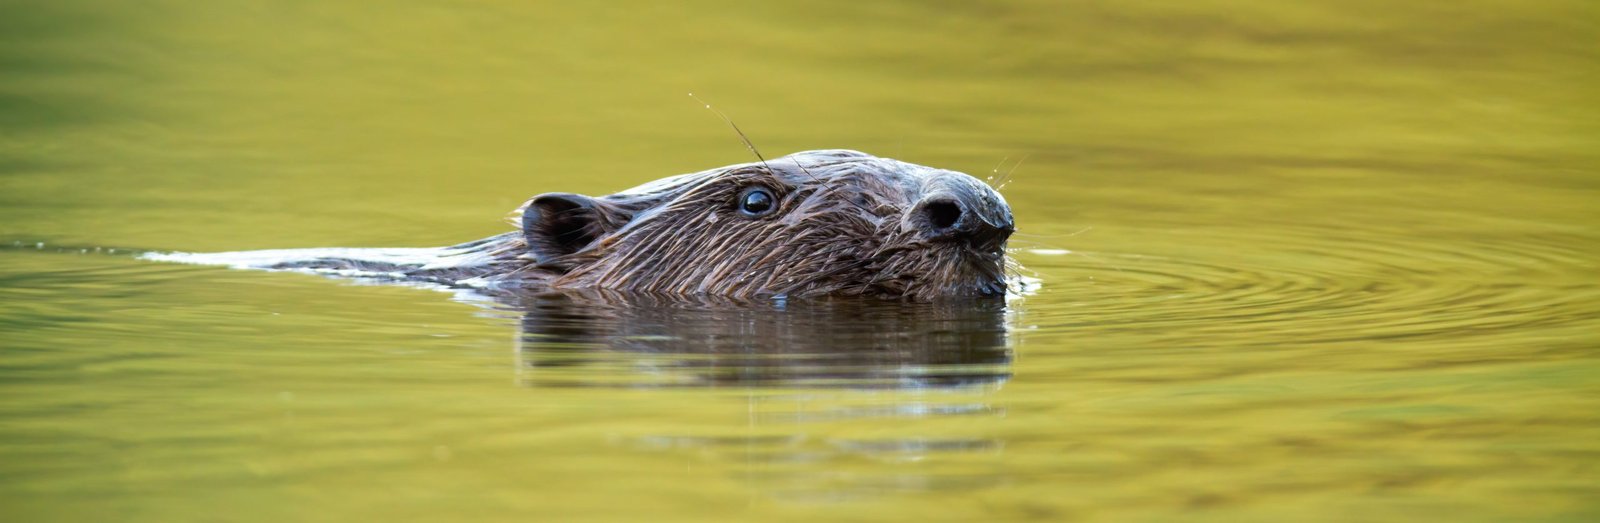 Picture of North American beaver swimming in pond